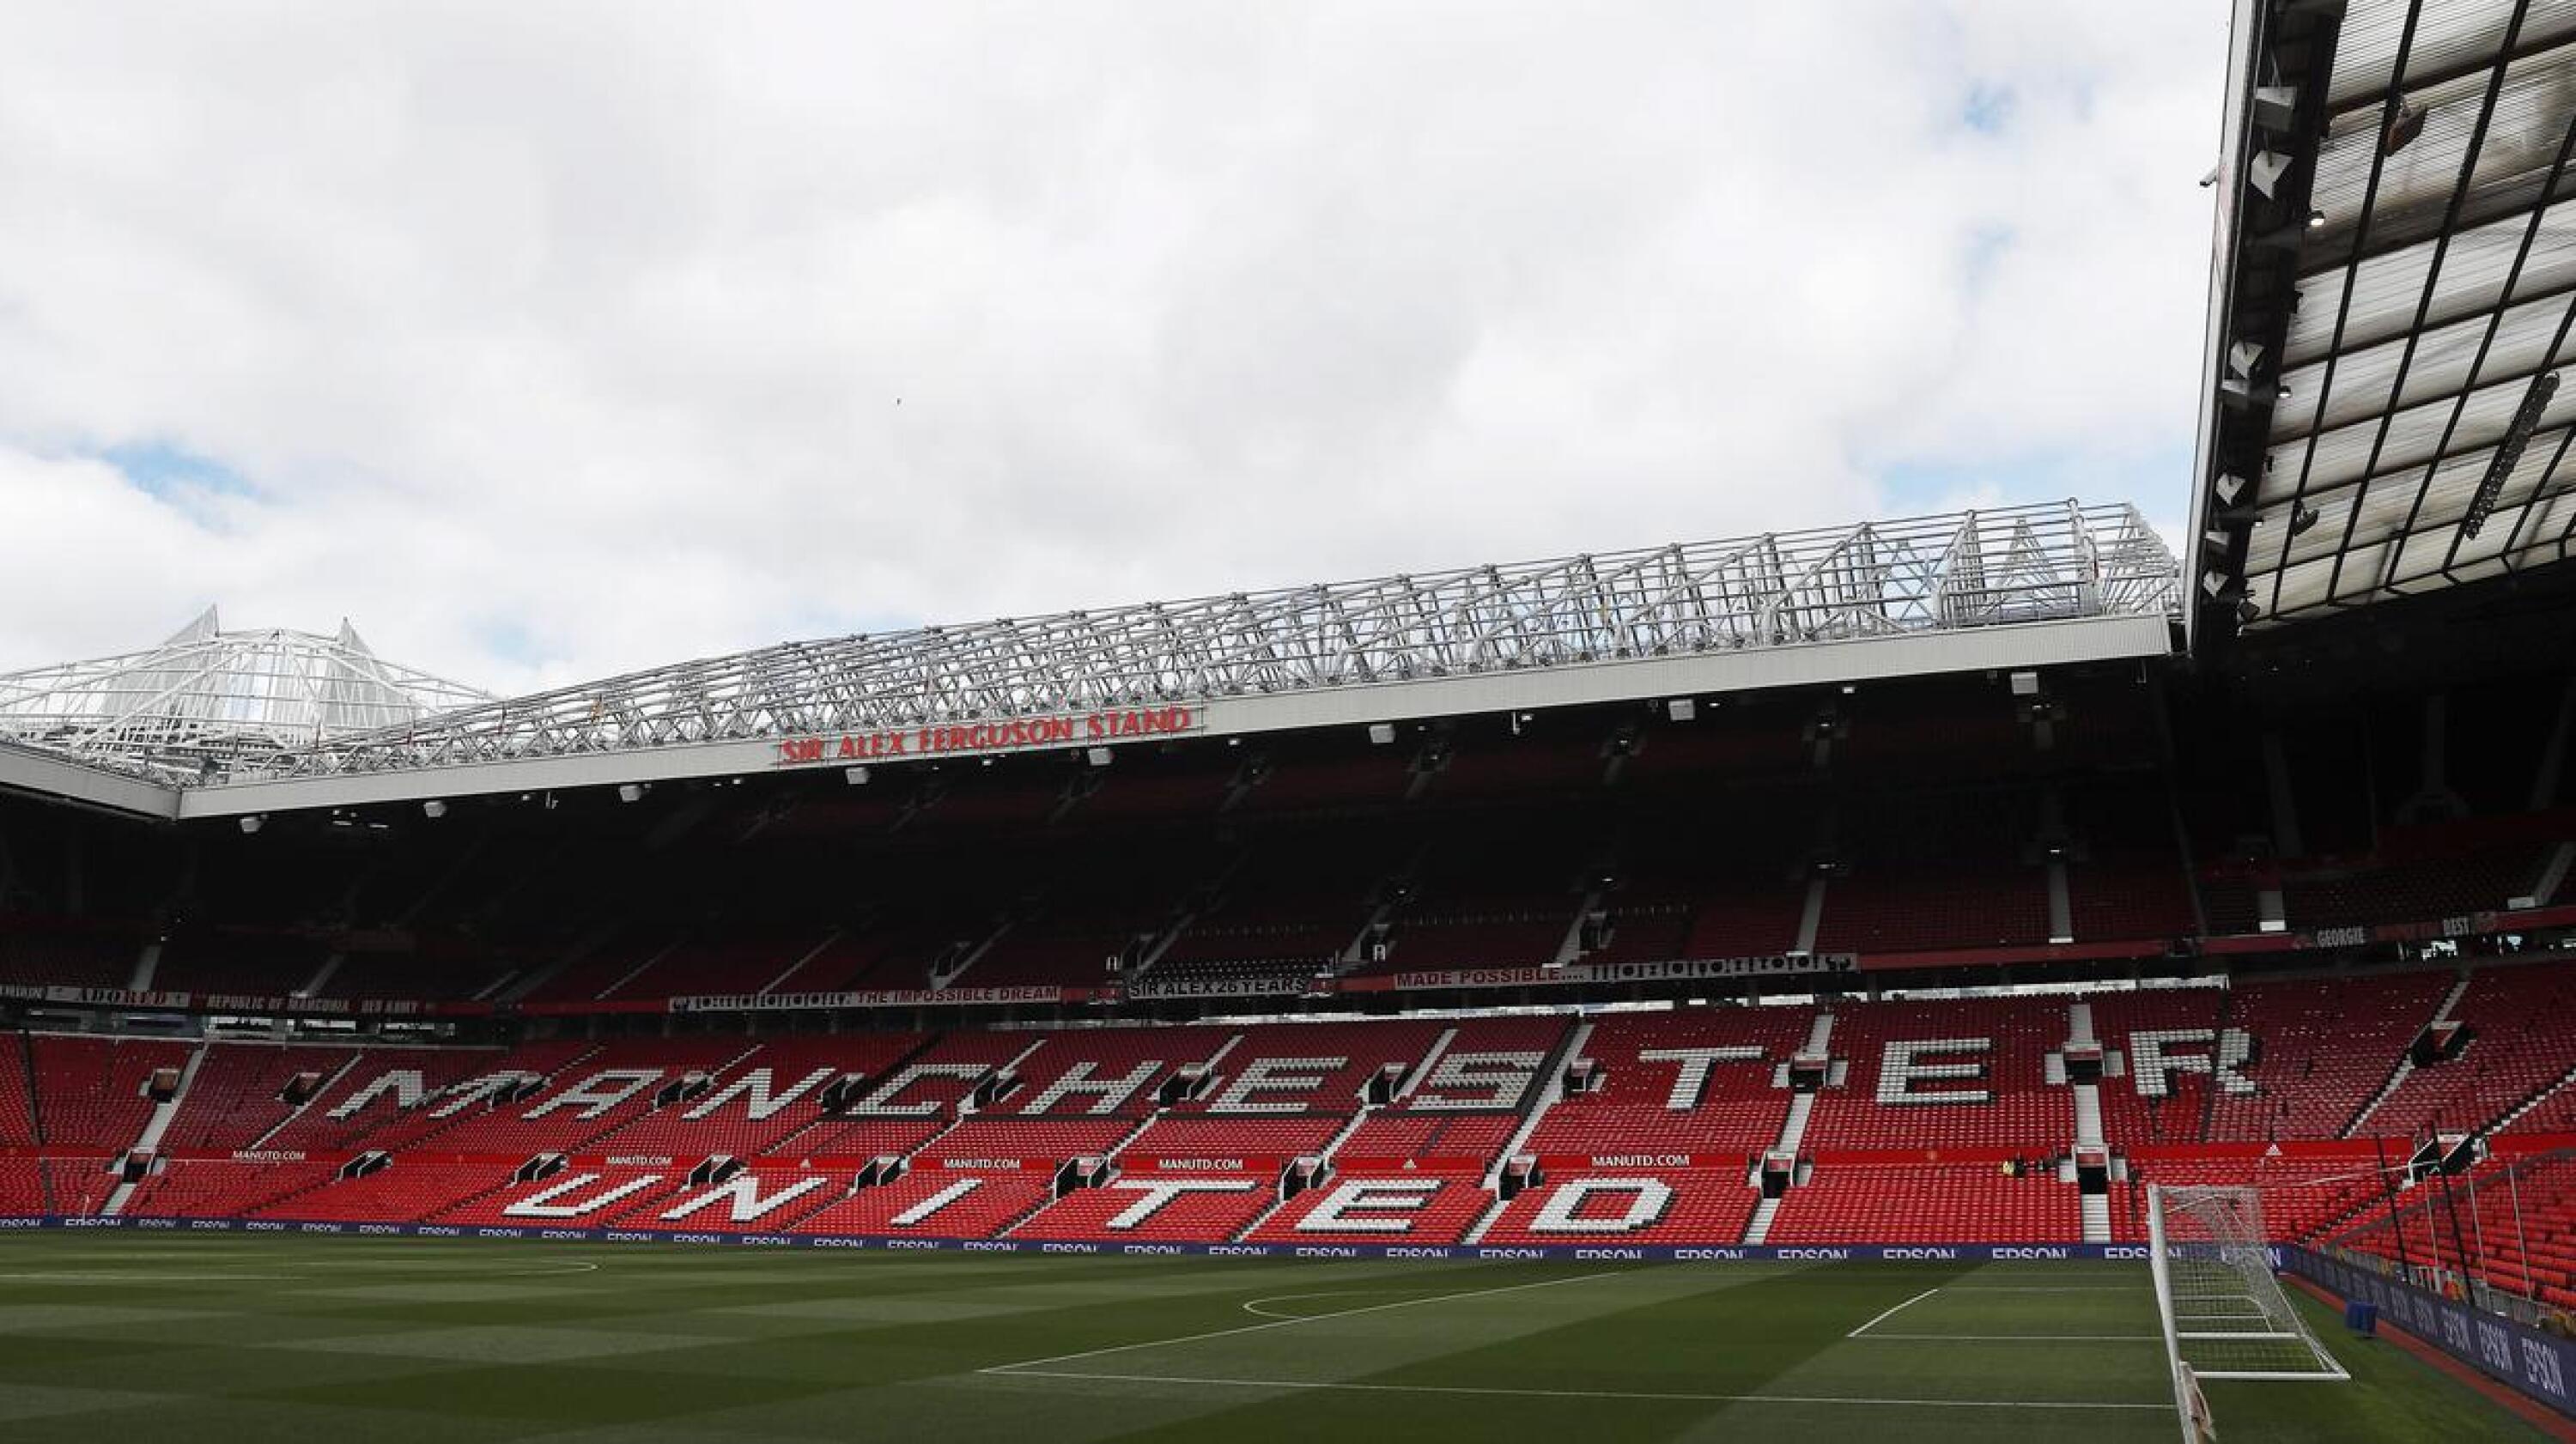 General view inside Manchester United’s Old Trafford